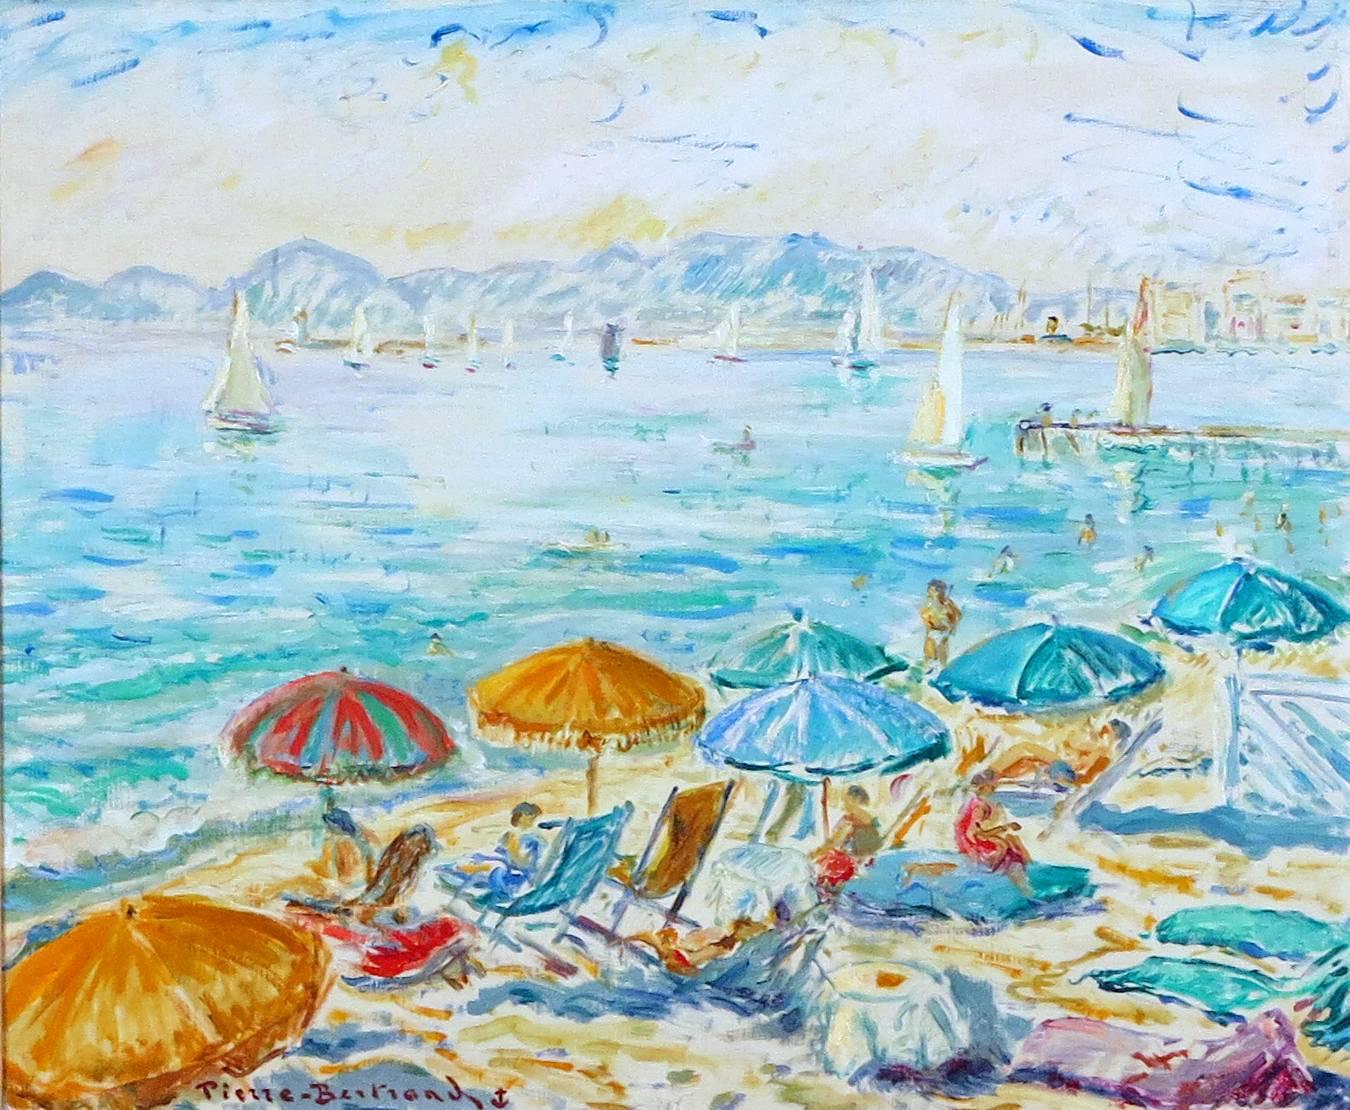 Pierre Philippe Bertrand. 
French, 1889-1975.
Les Parasols

Oil on canvas.
18 ¼ by 23 ½ with frame 26 ¼ by 31 ½ in.
Signed lower left.

Pierre Philippe was born in Lorient (Morbihan), France May 4, 1884 and died in Noirmoutier-en-l'Ile in 1975. His